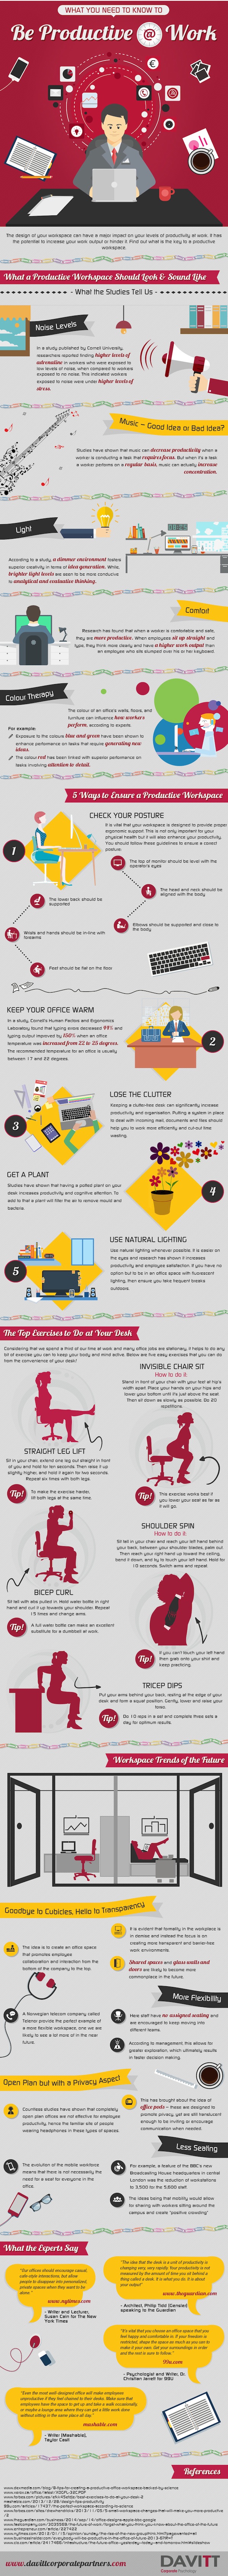 how-to-be-productive-at-work-infographic